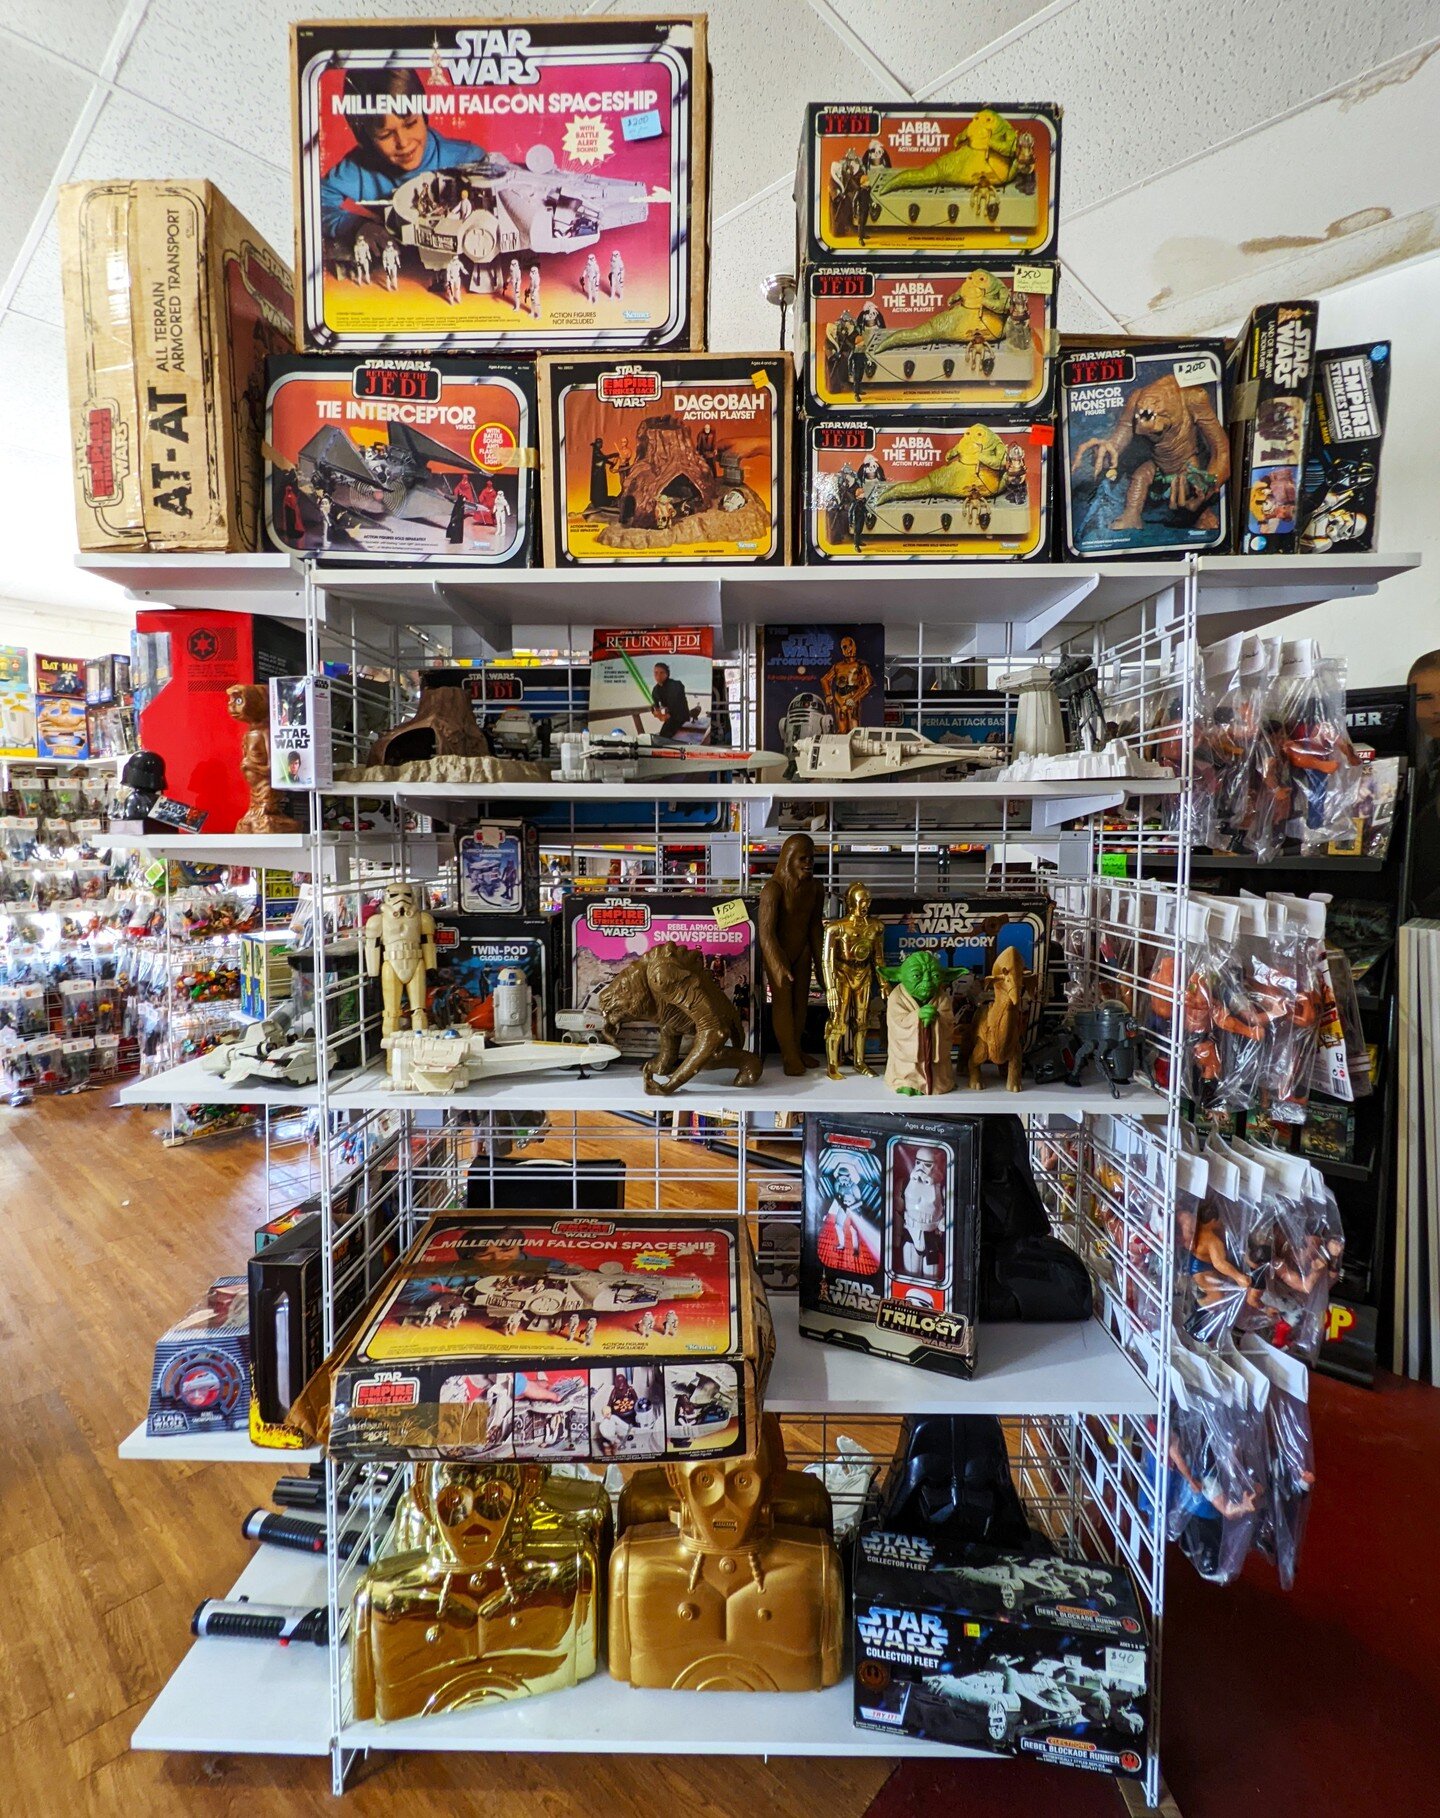 Yesterday I stumbled across a retro toy store on Hampton. It's full of interesting and vintage stuff and it's definitely worth a look. The place is @retrotvtoys and they seem to have a pretty active social media presence so if it's something you're i